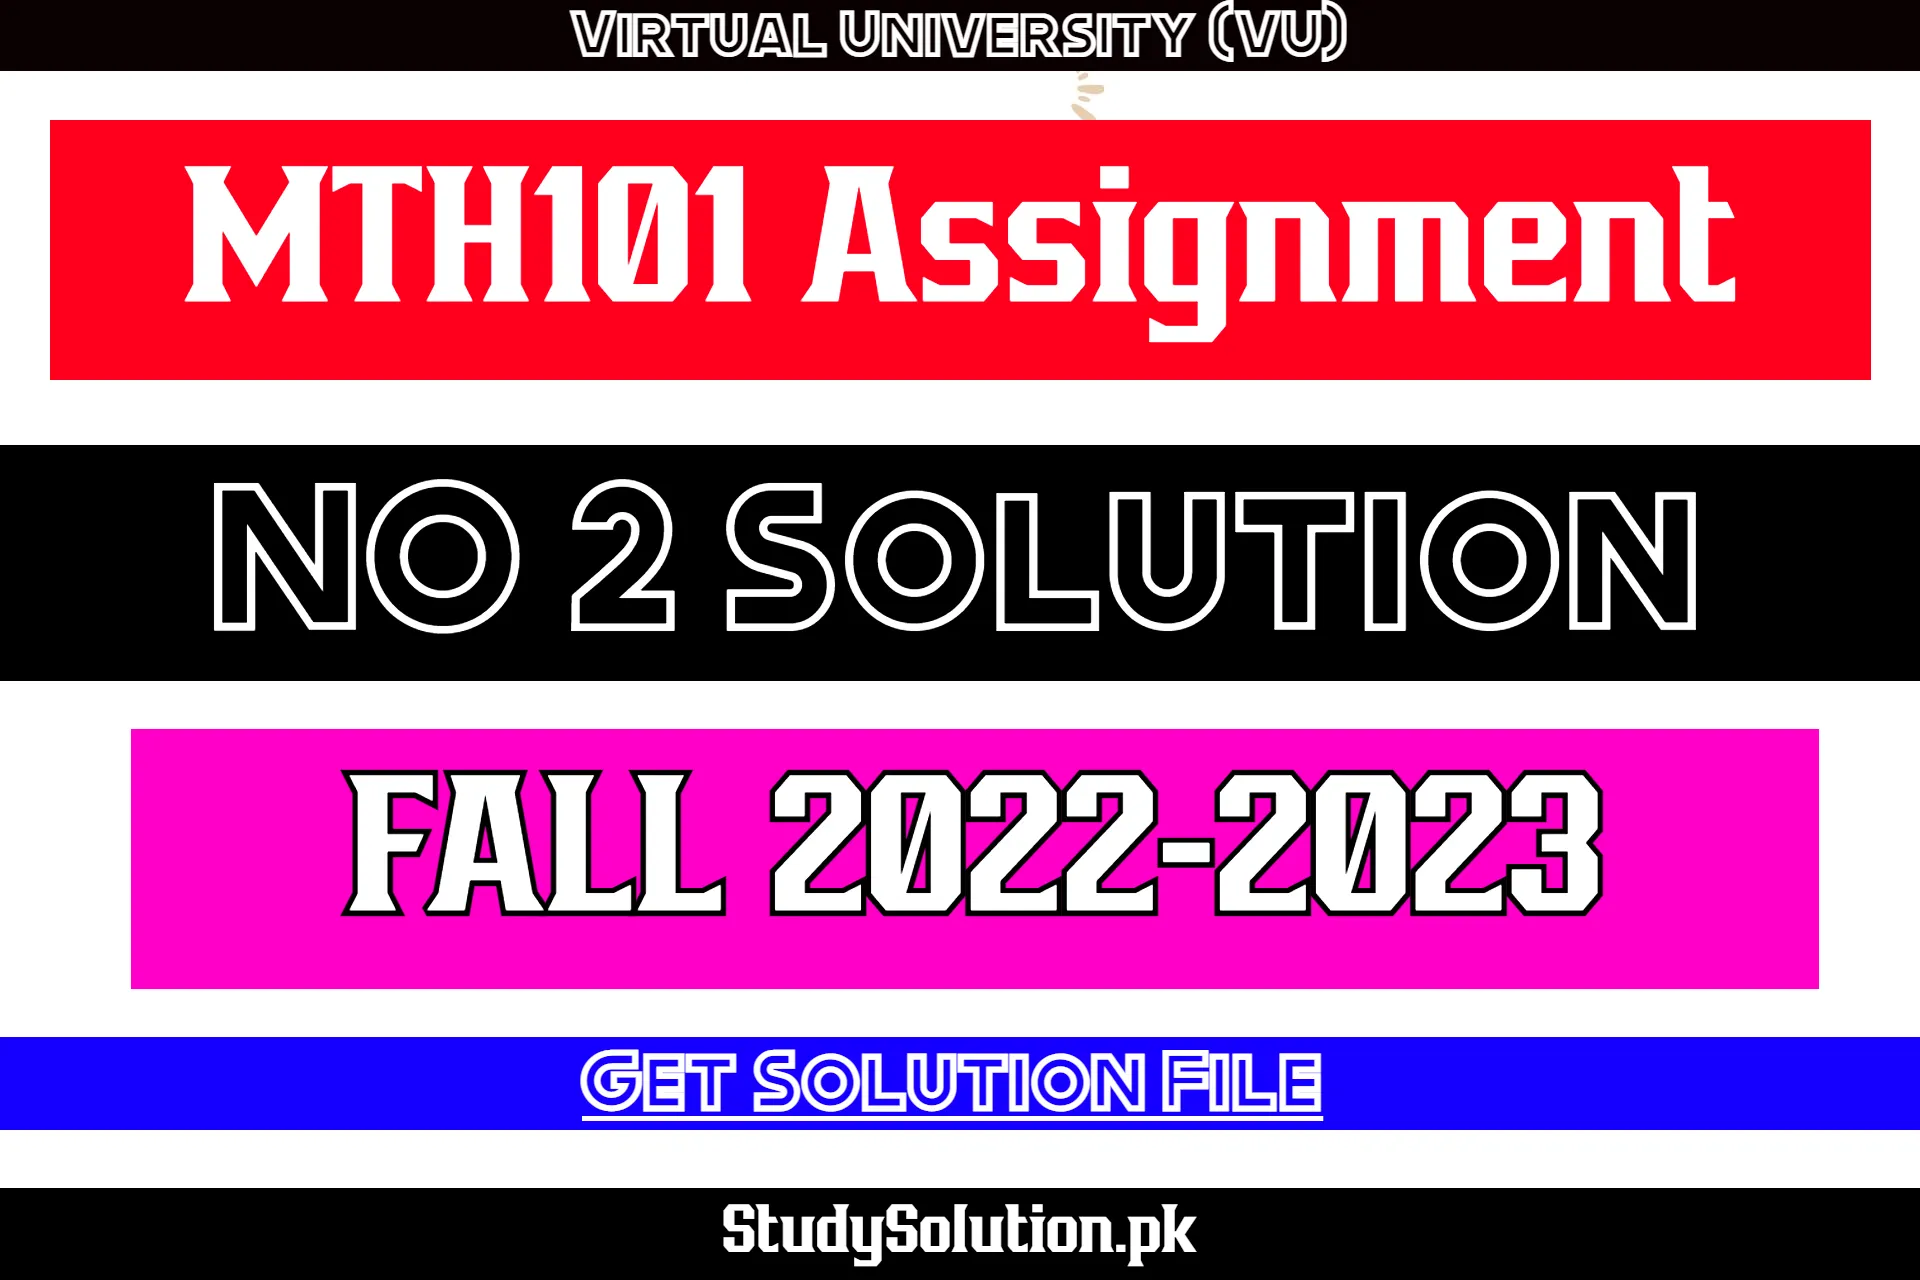 MTH101 Assignment No 2 Solution Fall 2022